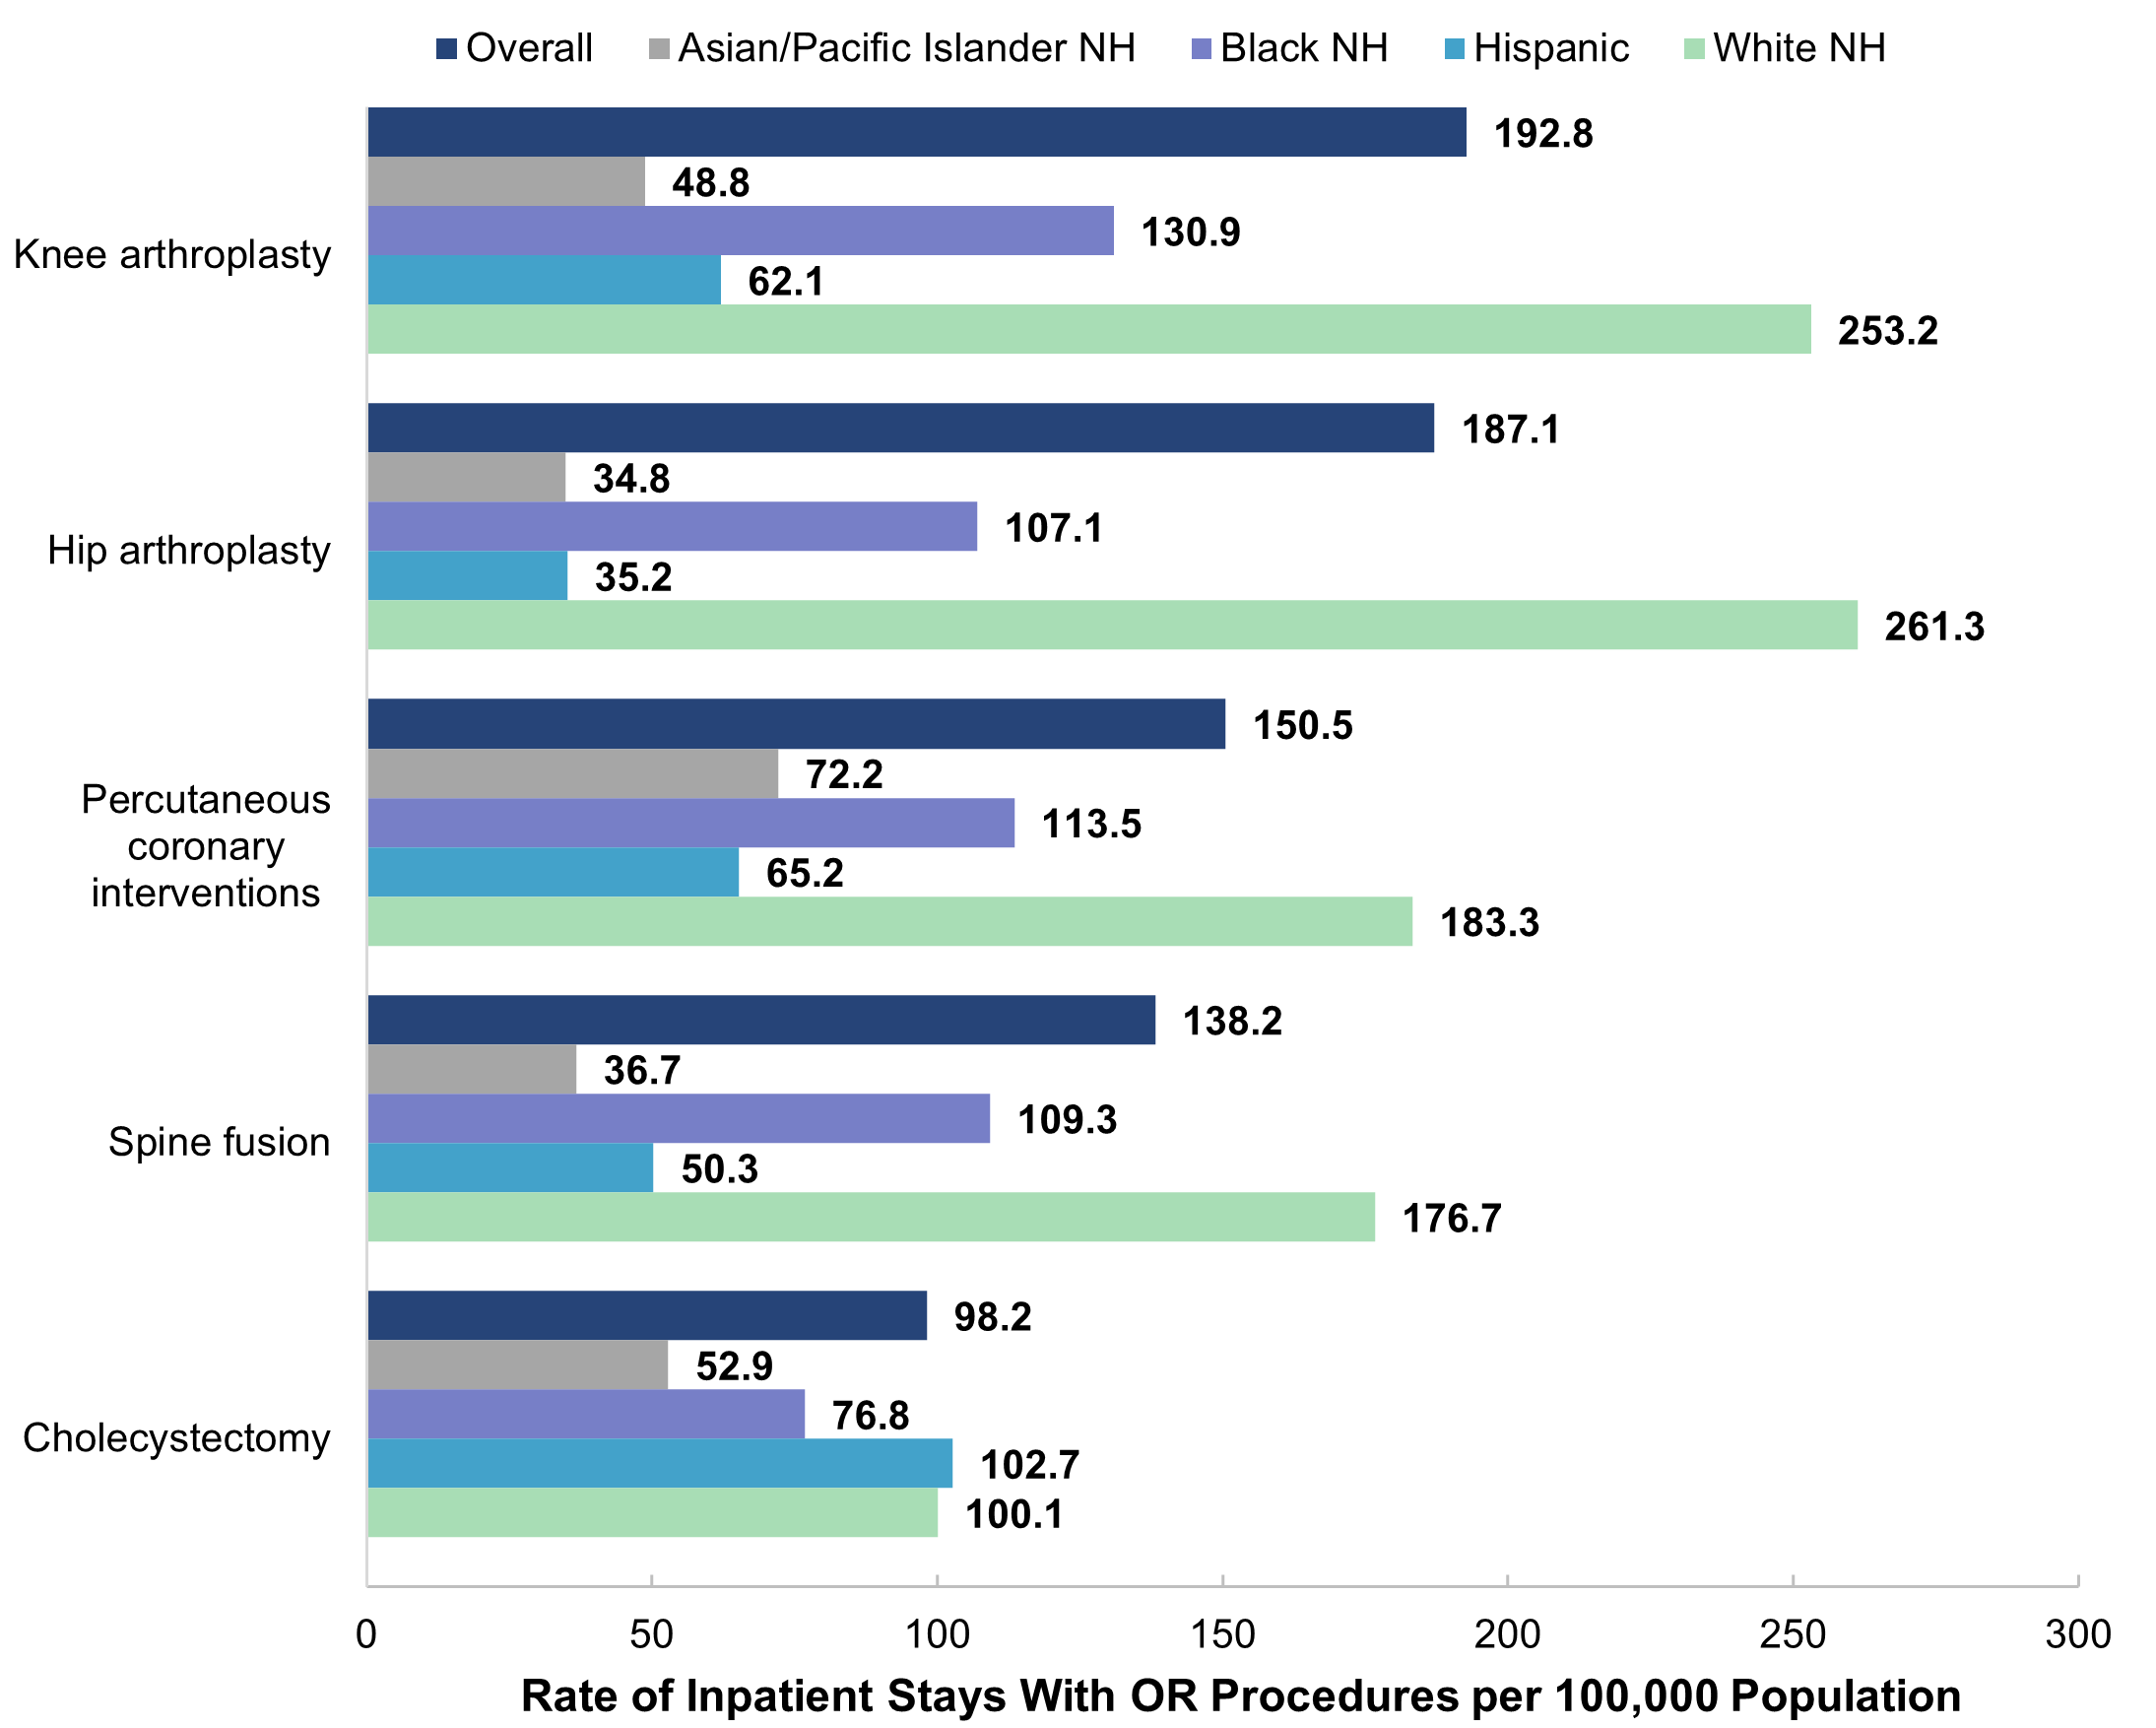 Bar chart showing the rate per 100,000 population of nonmaternal stays with the five most 
					common operating room (OR) procedures by patient race and ethnicity (Asian/Pacific Islander [API] 
					non-Hispanic [NH], Black NH, Hispanic, White NH) in 2019. Knee arthroplasty: overall (192.8), API 
					NH (48.8), Black NH (130.9), Hispanic (62.1), White NH (253.2). Hip arthroplasty: overall (187.1), 
					API NH (34.8), Black NH (107.1), Hispanic (35.2), White NH (261.3). Percutaneous coronary 
					interventions: overall (150.5), API NH (72.2), Black NH (113.5), Hispanic (65.2), White NH (183.3). 
					Spine fusion: overall (138.2), API NH (36.7), Black NH (109.3), Hispanic (50.3), White NH (176.7). 
					Cholecystectomy: overall (98.2), API NH (52.9), Black NH (76.8), Hispanic (102.7), White NH (100.1).